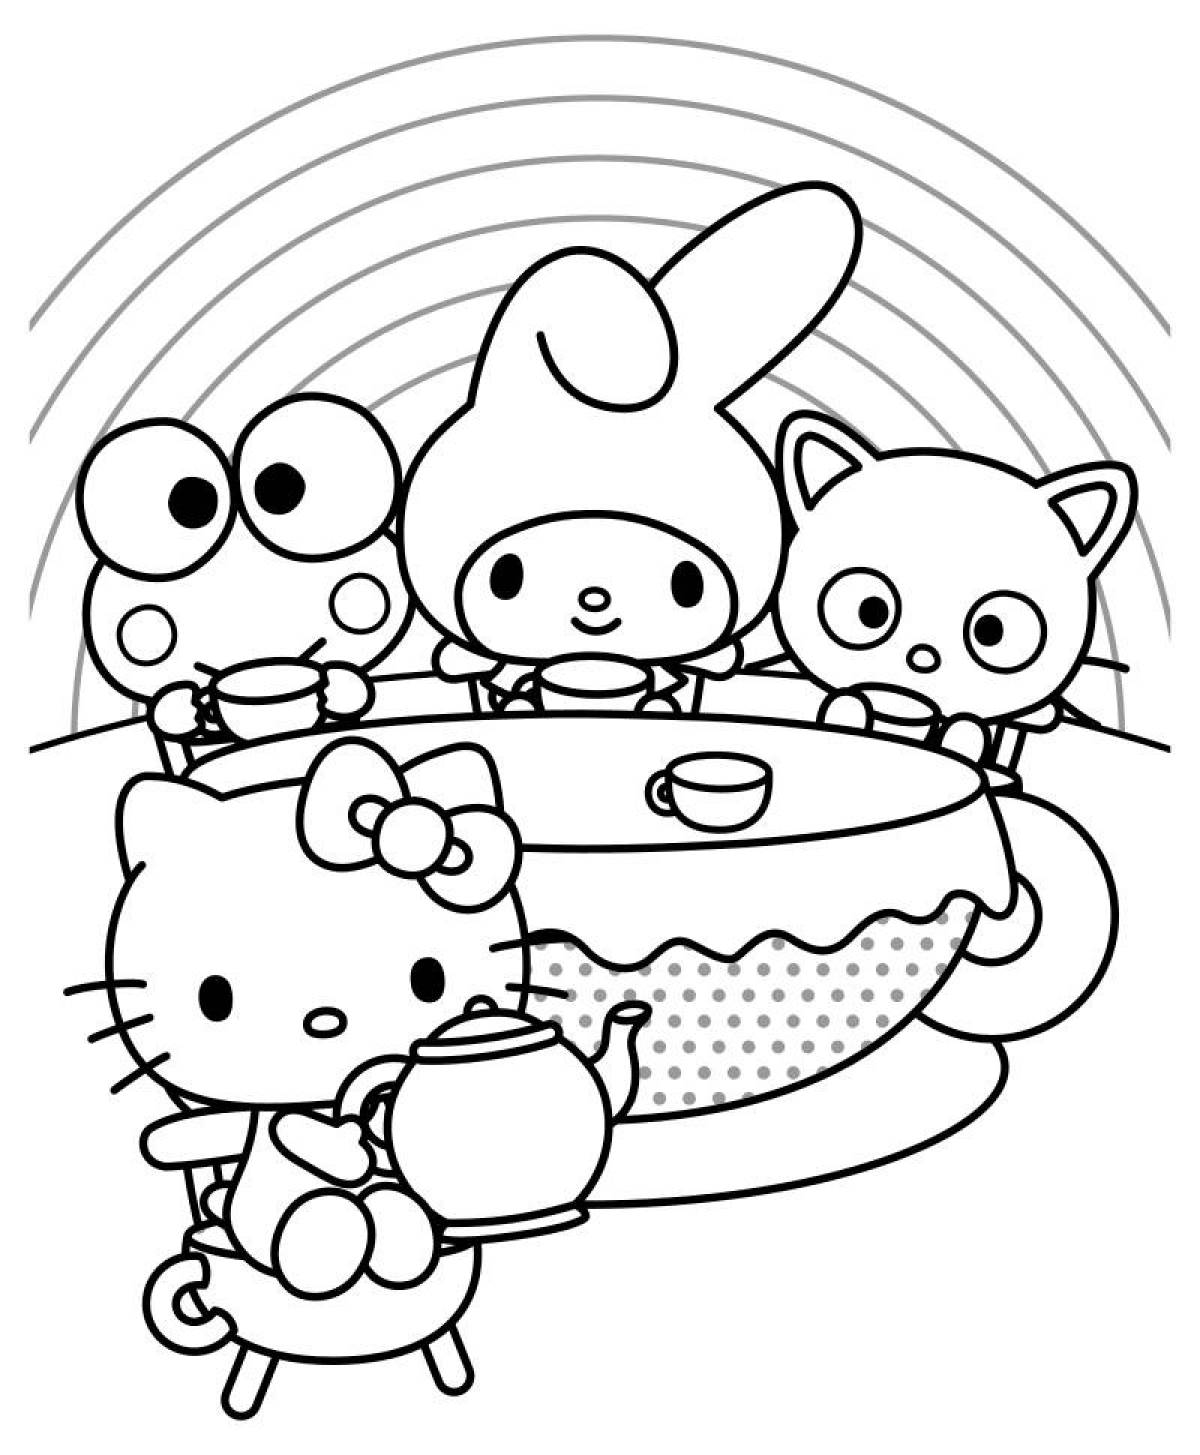 Kuromi and hello kitty coloring pages